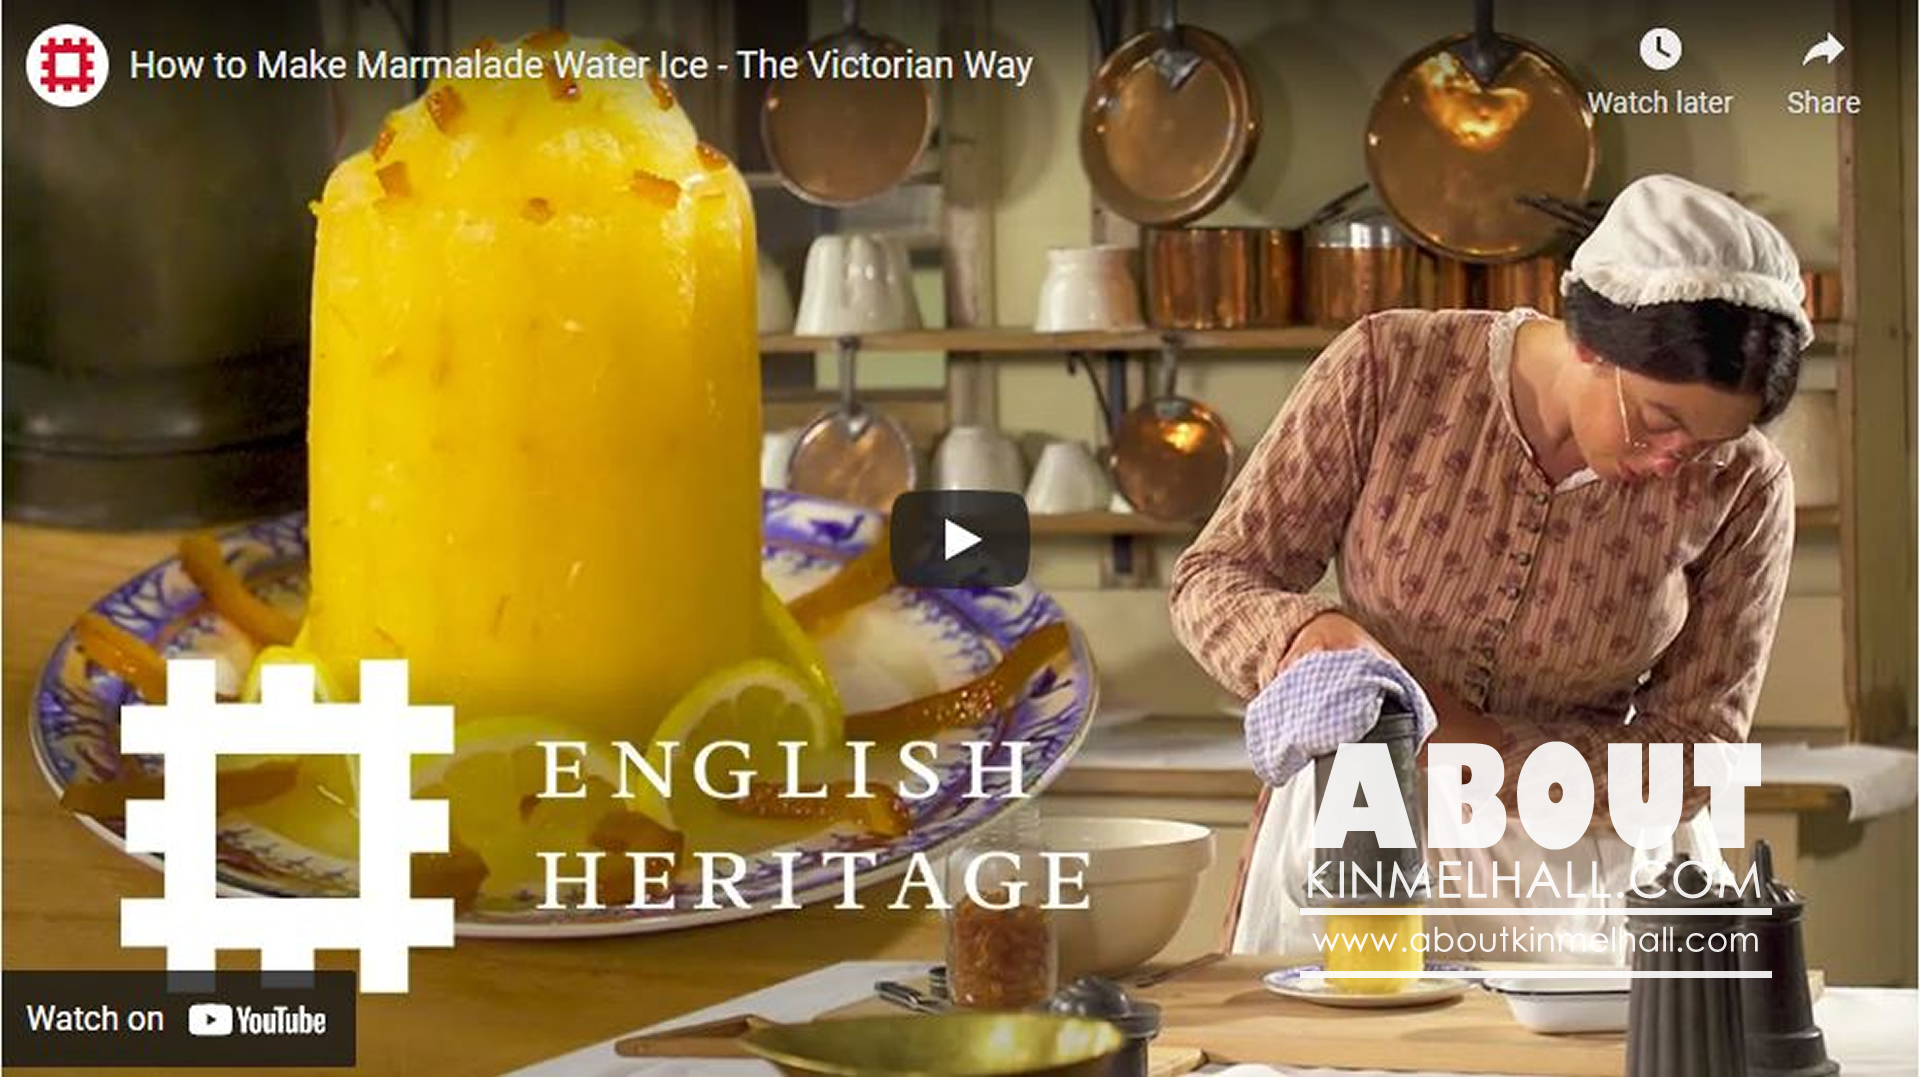 Education Resources - Victorian Cookery Session 8 by English Heritage